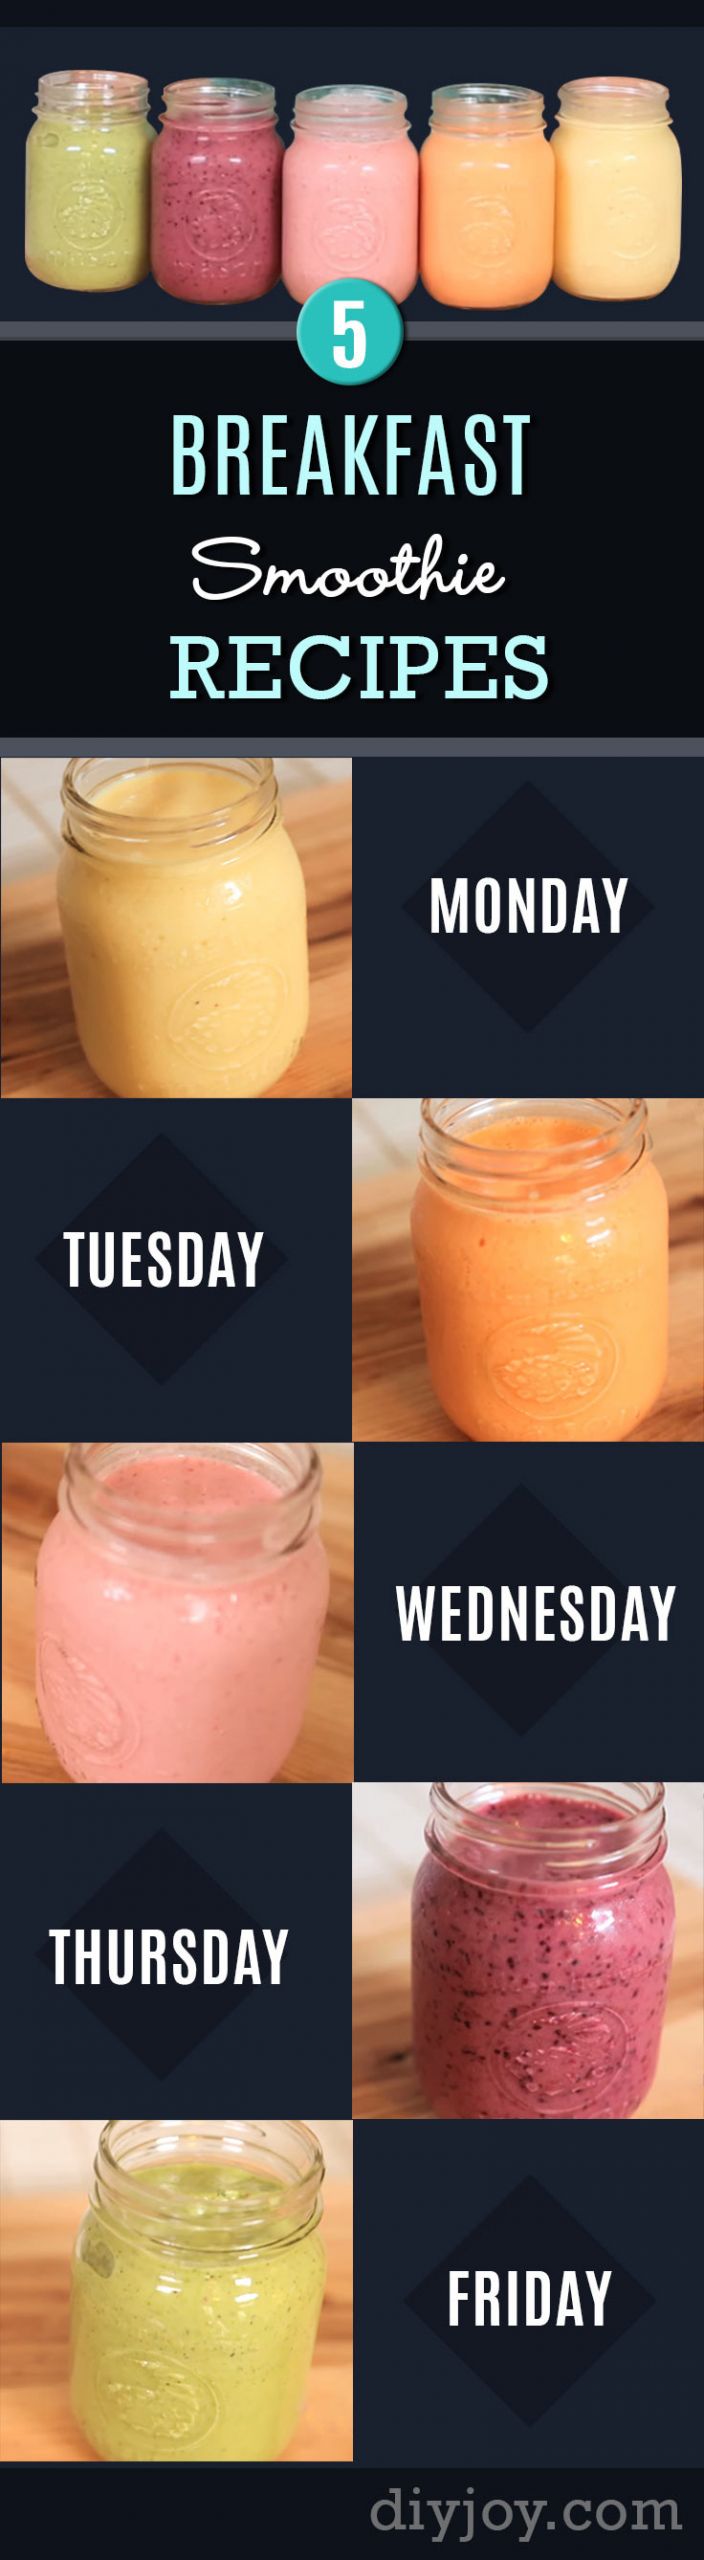 Low Calorie Weight Loss Smoothies
 Monday to Friday 5 Breakfast Smoothie Recipes